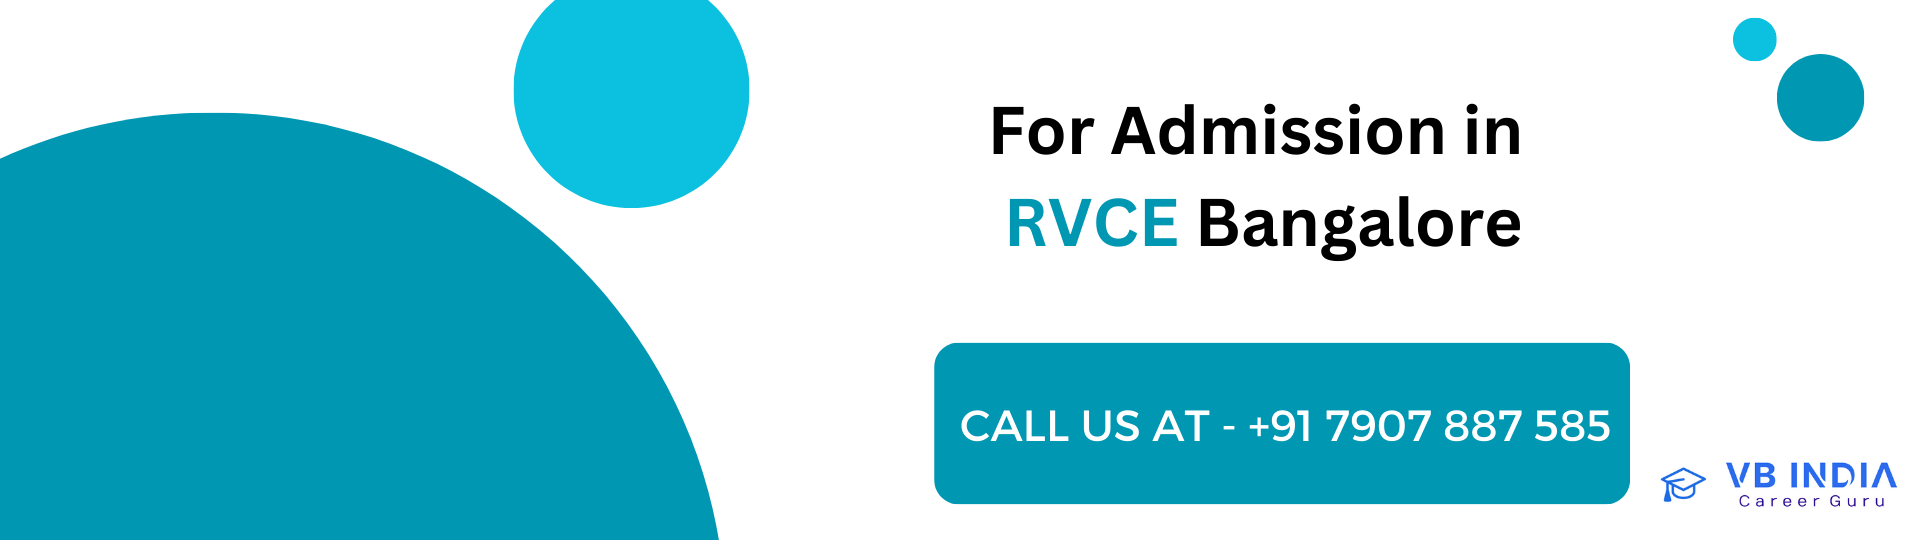 RVCE-Admissions